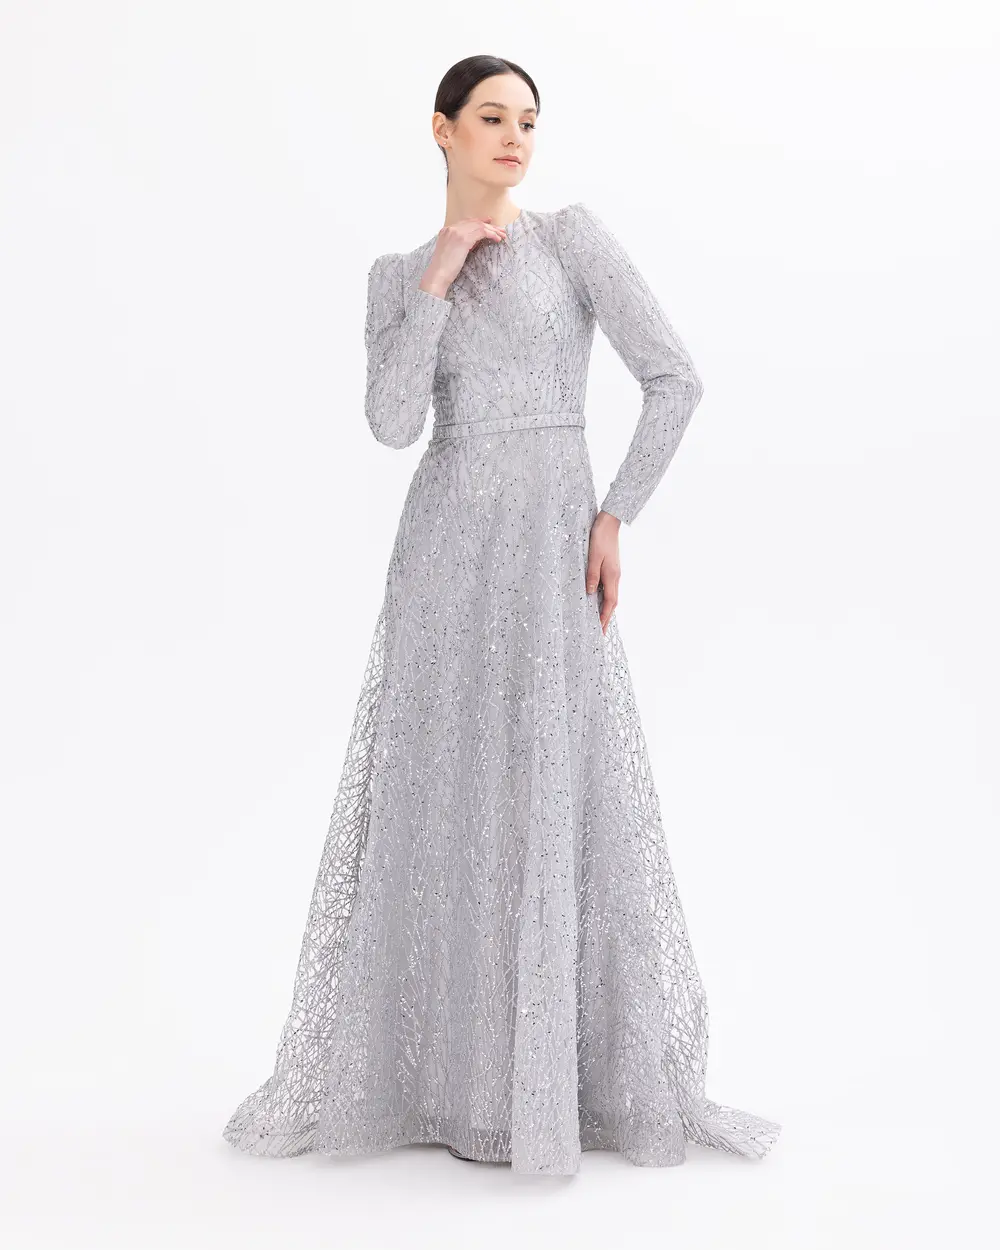 Belted Maxi Length Silvery Long Sleeve Evening Dress